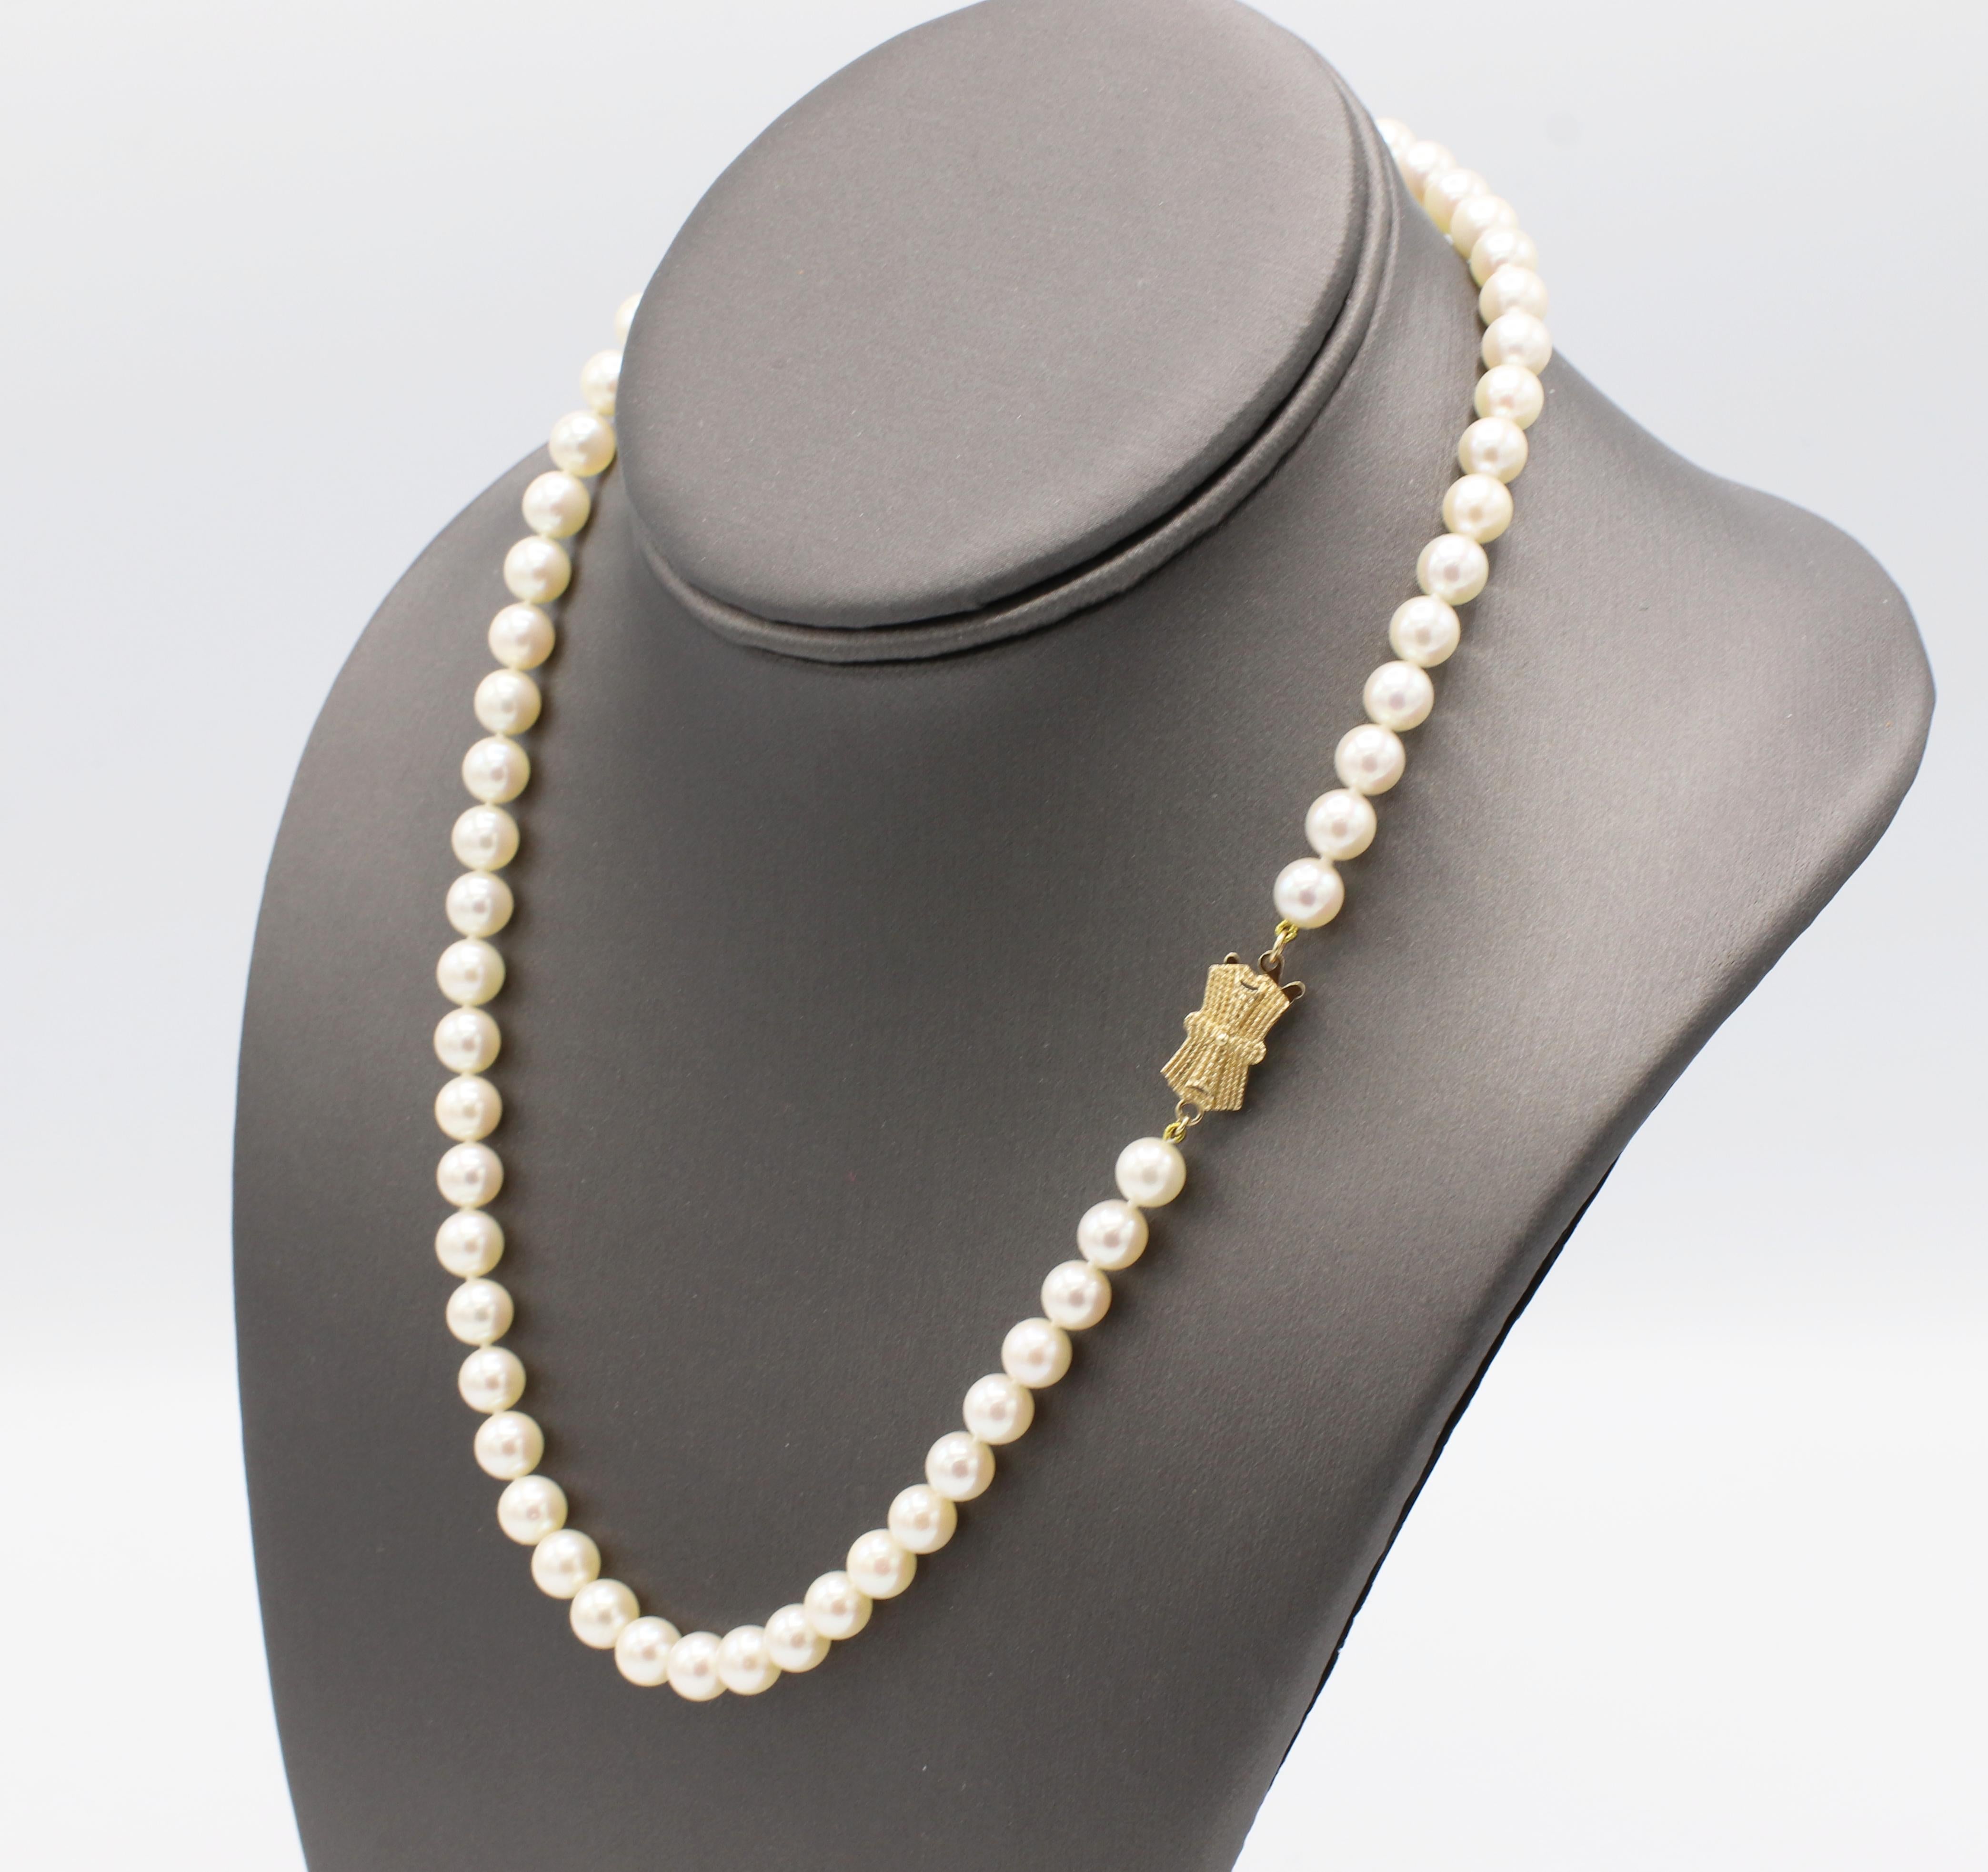 Mikimoto Sea Magic Cultured Pearl Yellow Gold Cross Necklace
Metal: 18k yellow gold
Pearls: 6.6 - 7MM round cultured pearls with a creamy luster
Weight: 28.8 grams
Length: 18 inches
Signed: BL 585
Box included 